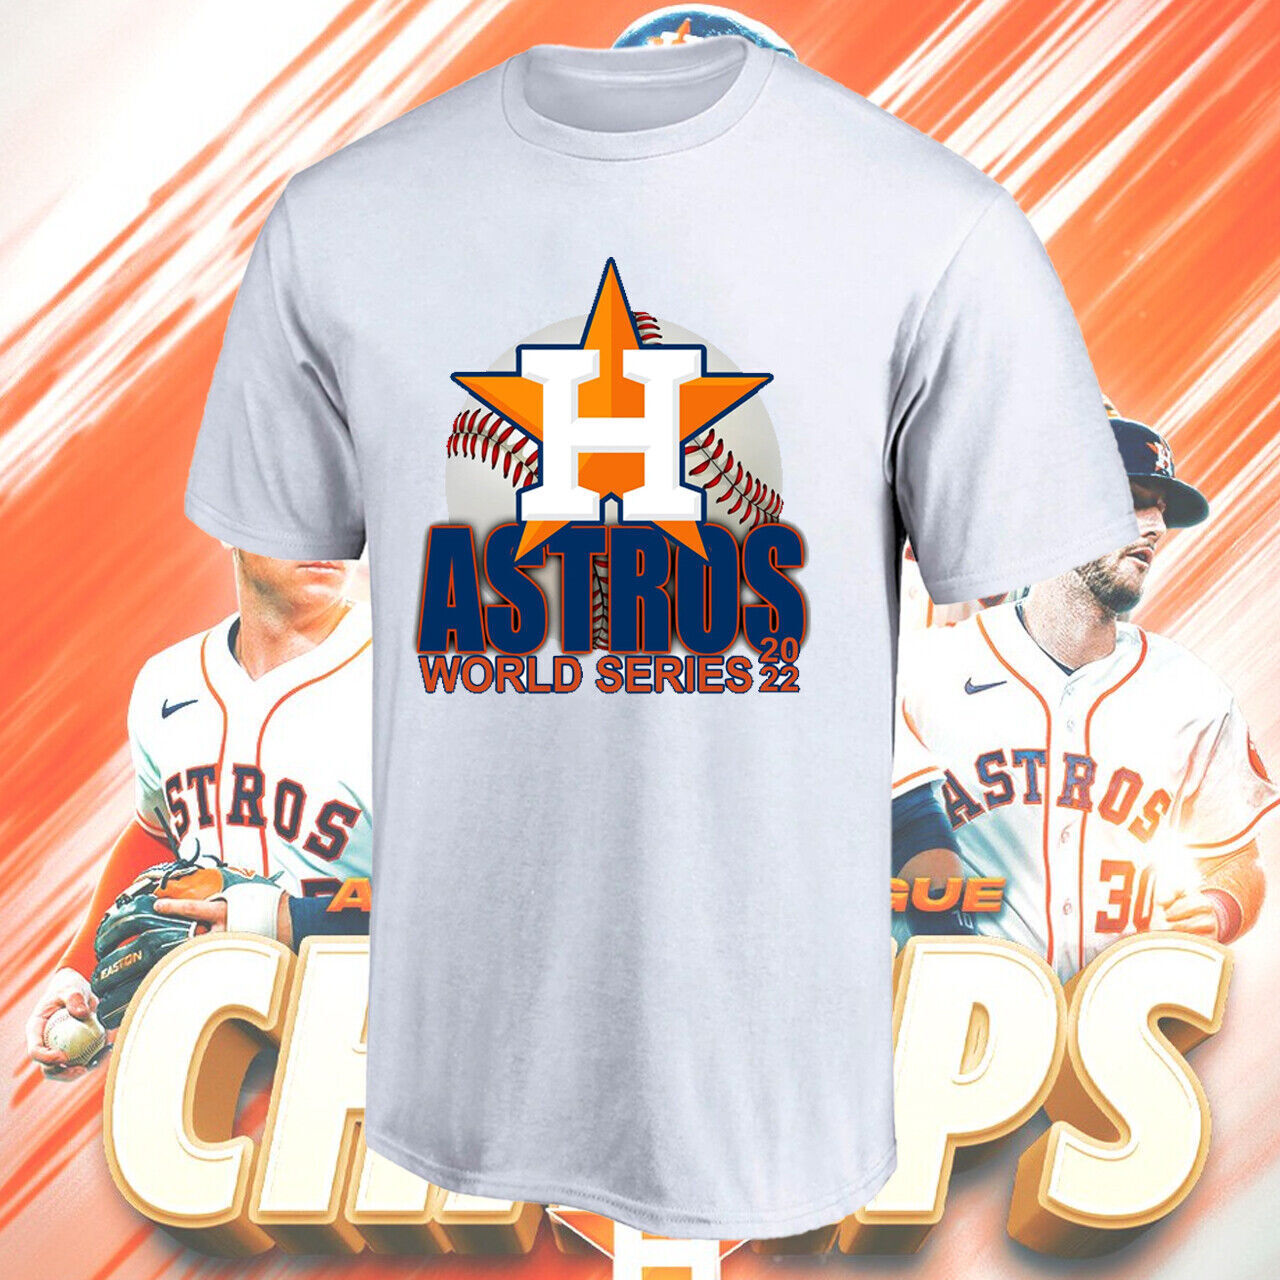 Houston Astros 2022 Finals Baseball Team Champs Unisex T-shirt S-5xl Full Size Up To 5xl